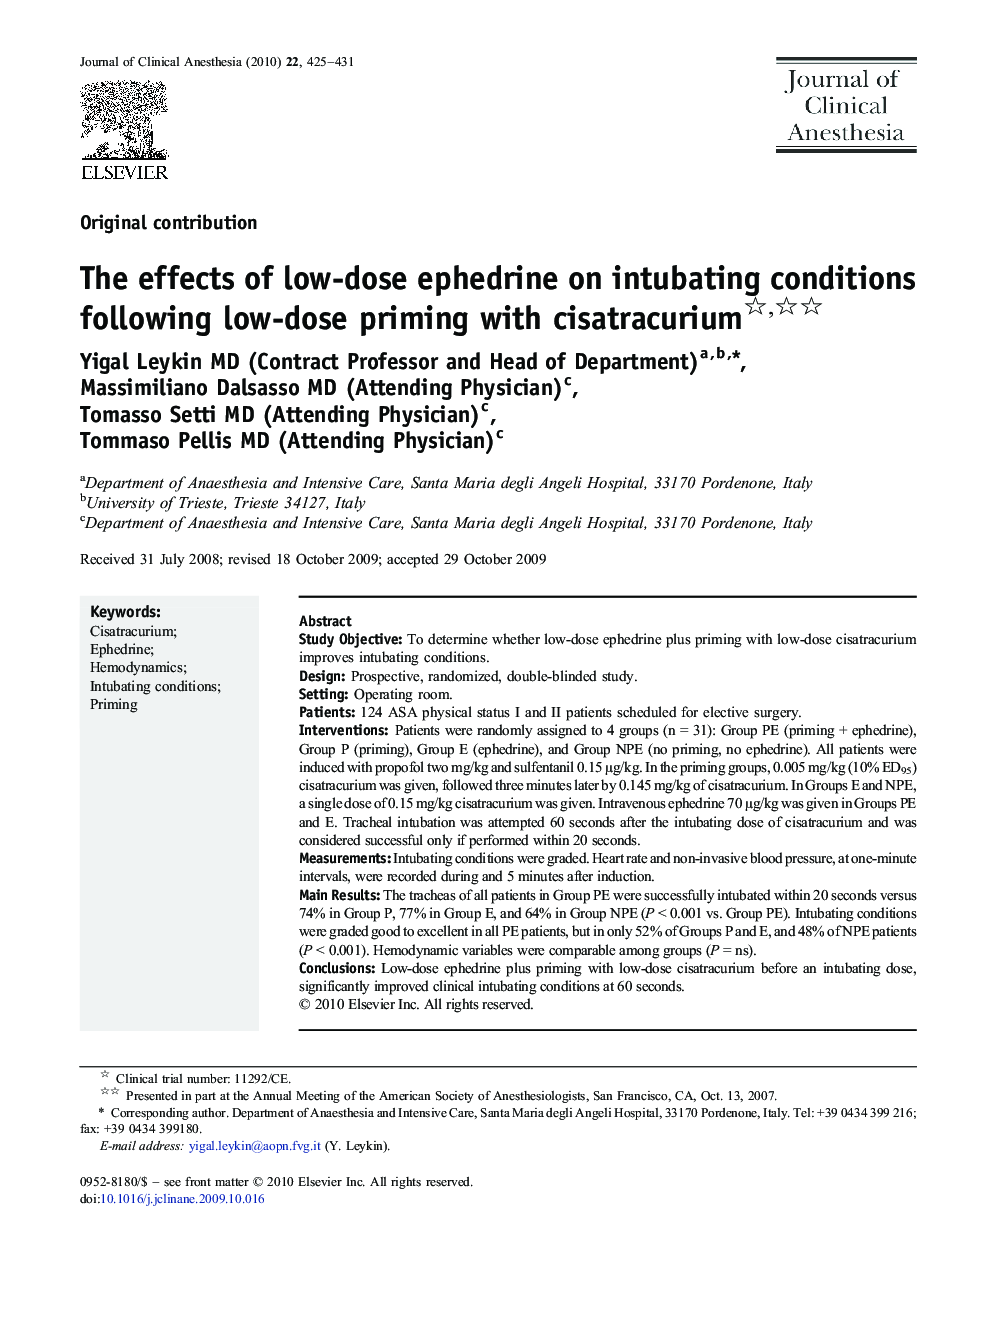 The effects of low-dose ephedrine on intubating conditions following low-dose priming with cisatracurium 